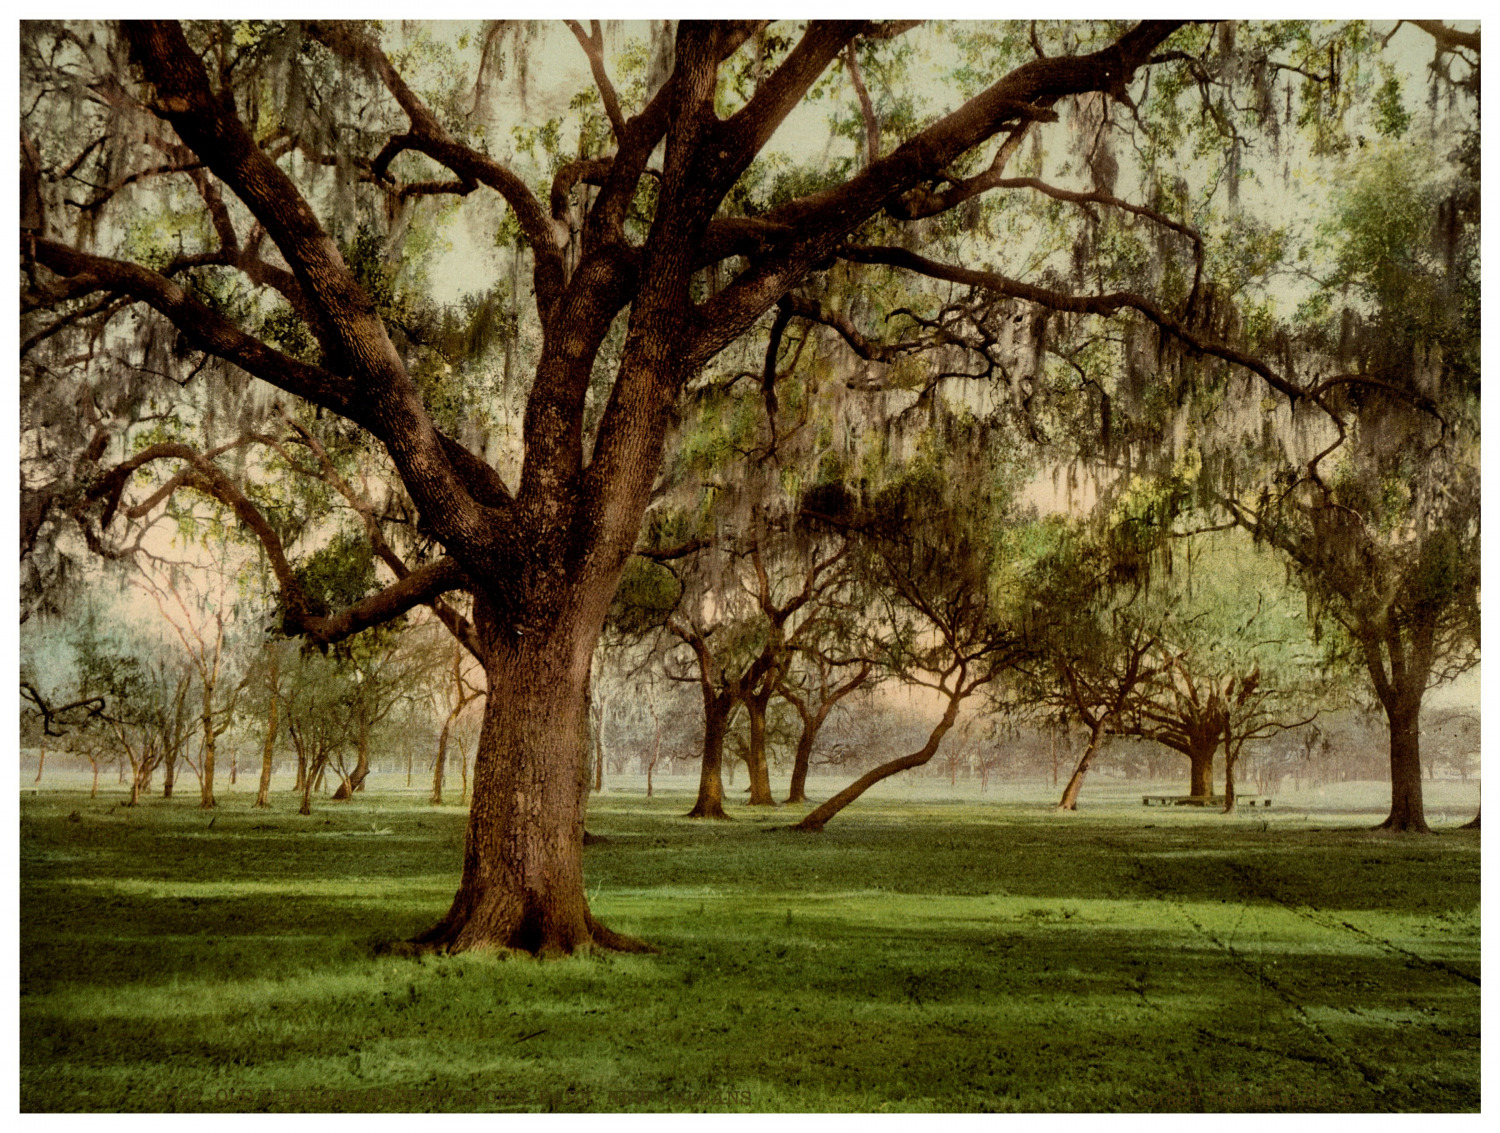 Louisiana, New Orleans, Old Duelling Ground, City Park Vintage Photochrome, p